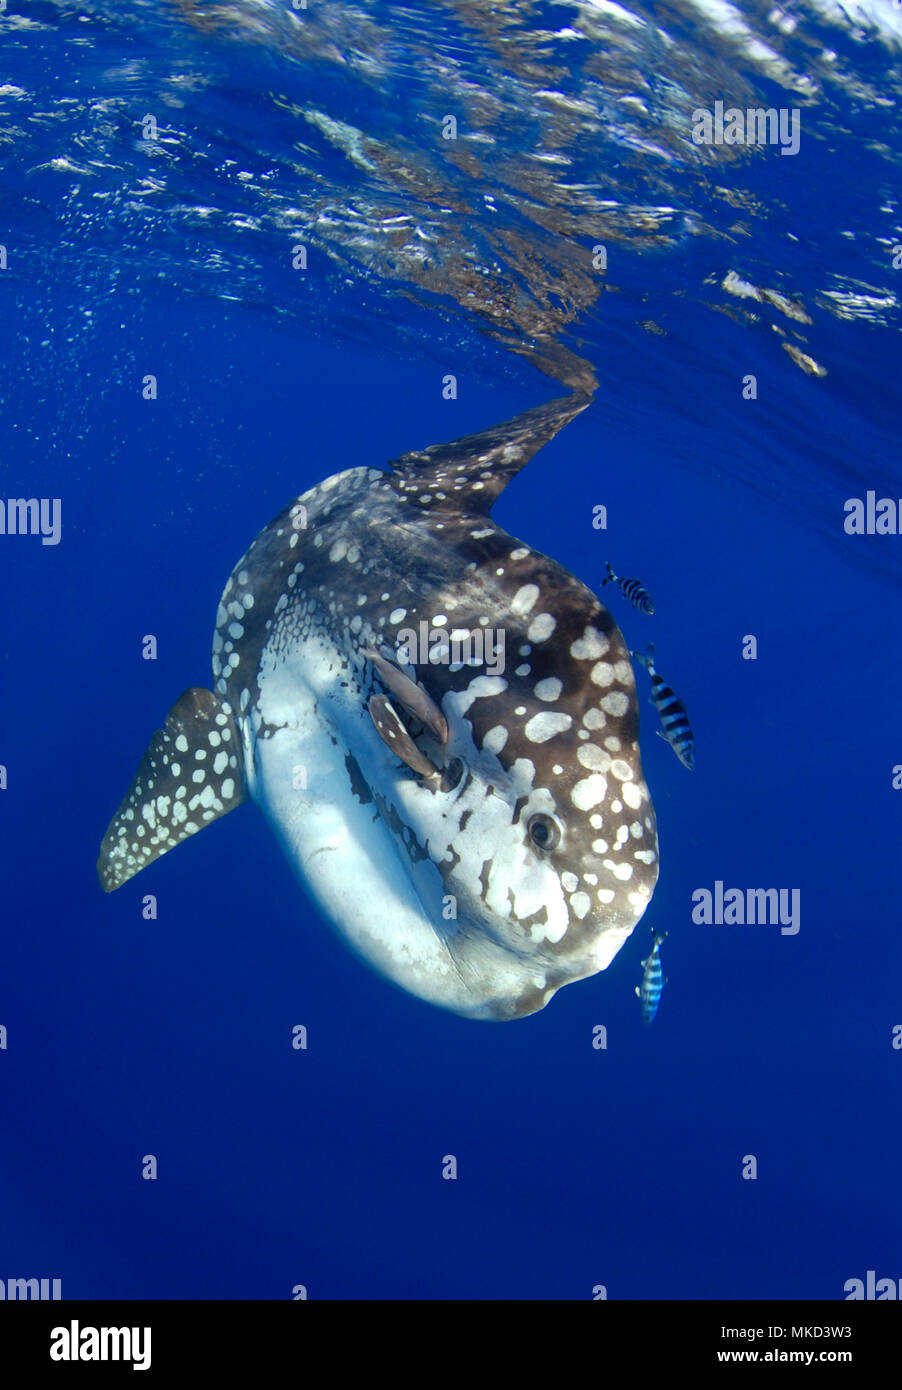 Ocean sunfich (Mola mola) at sea with pilot fishes (Naucrates ductor), Tenerife, Canary Islands. Stock Photo